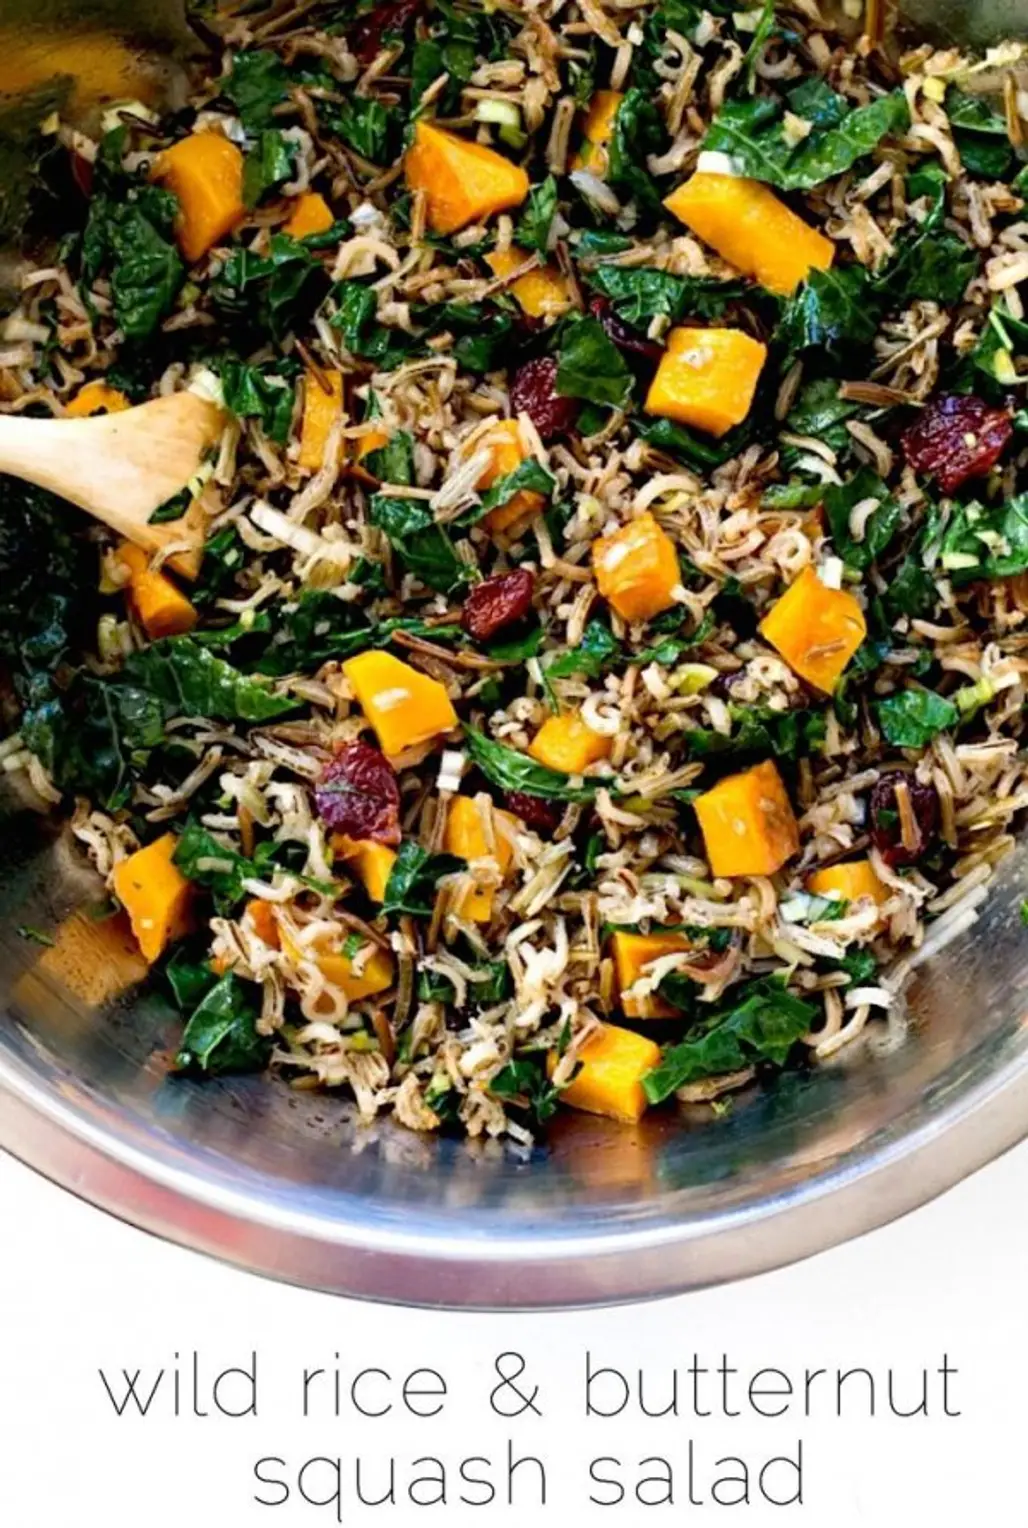 Wild Rice and Butternut Squash Salad with Maple Dressing